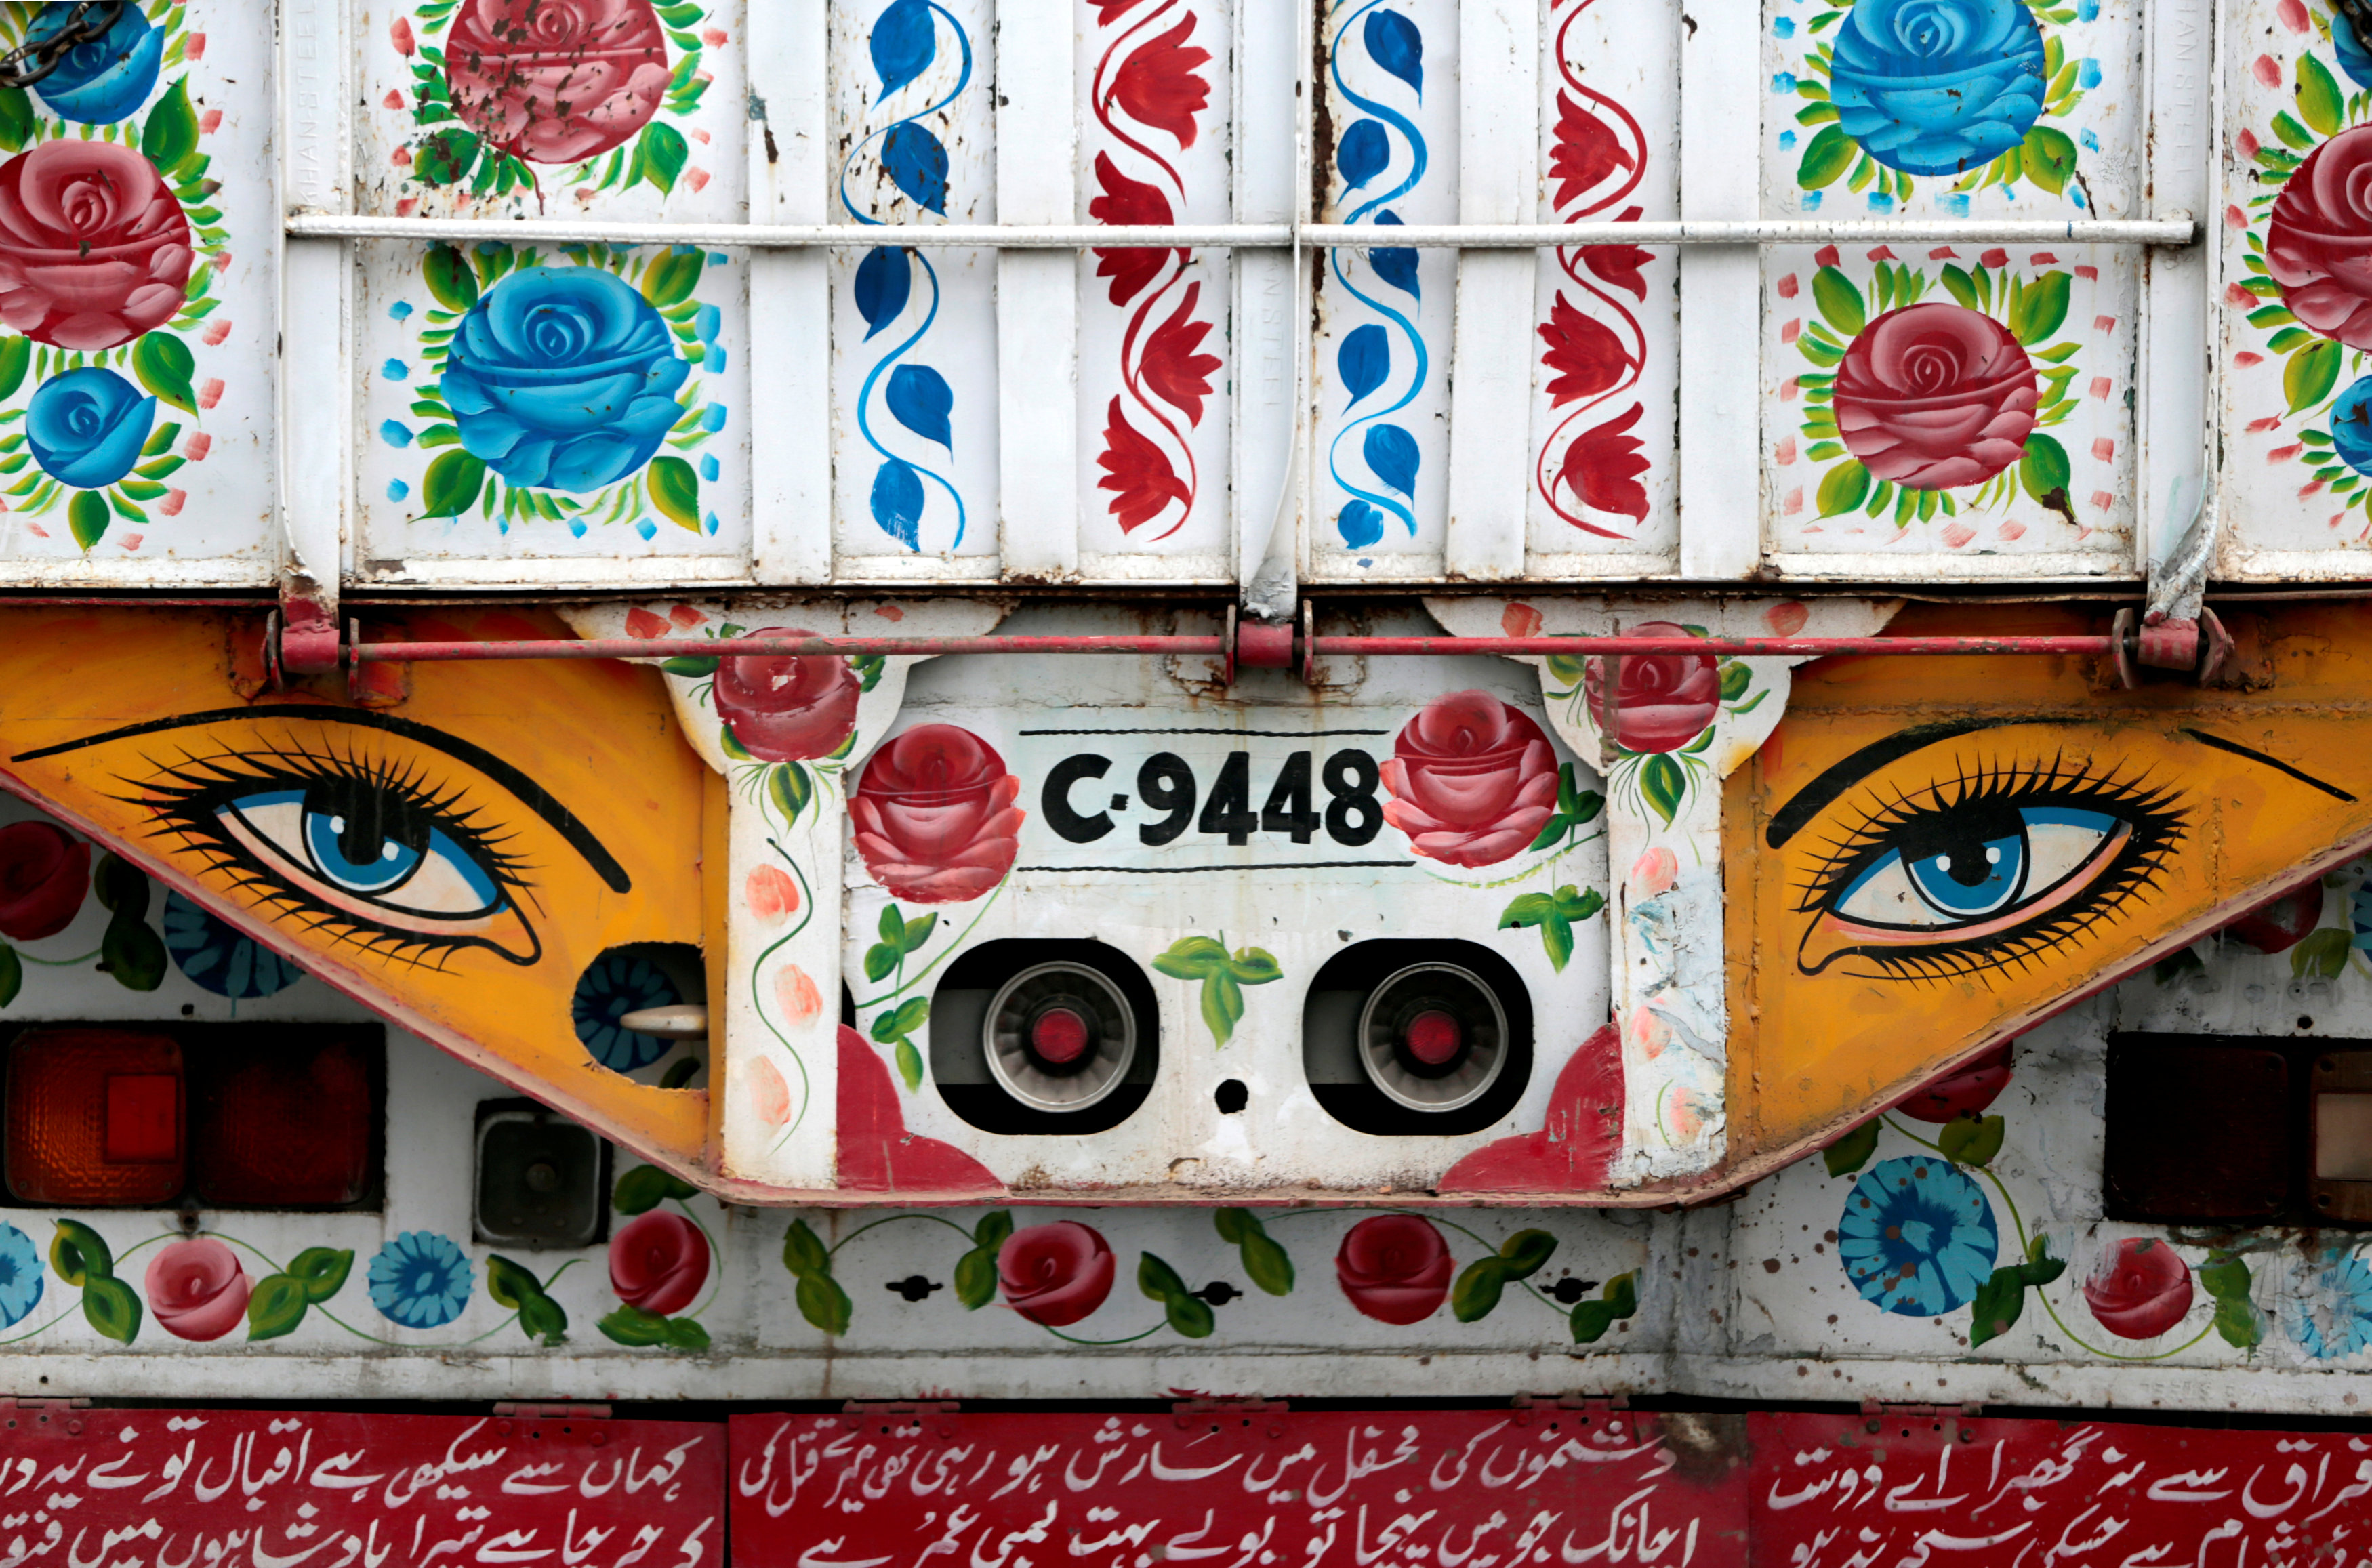 In pictures: Decorated trucks of Pakistan